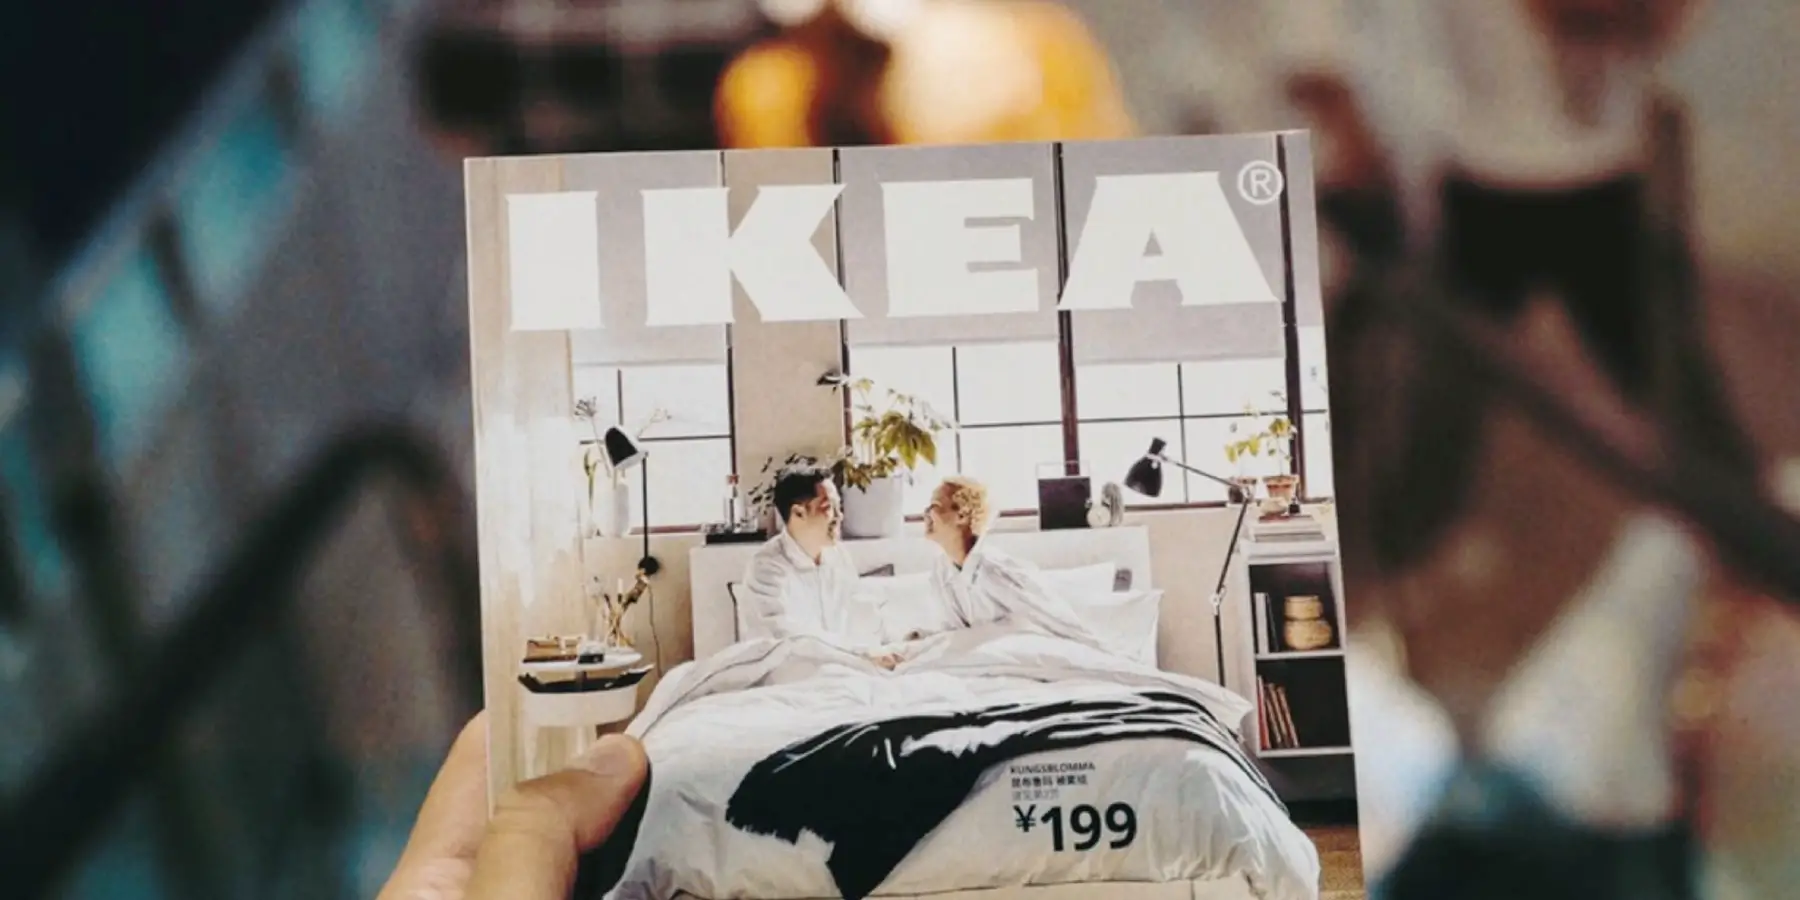 Reasons IKEA Is Affordable: A Concise Explainer